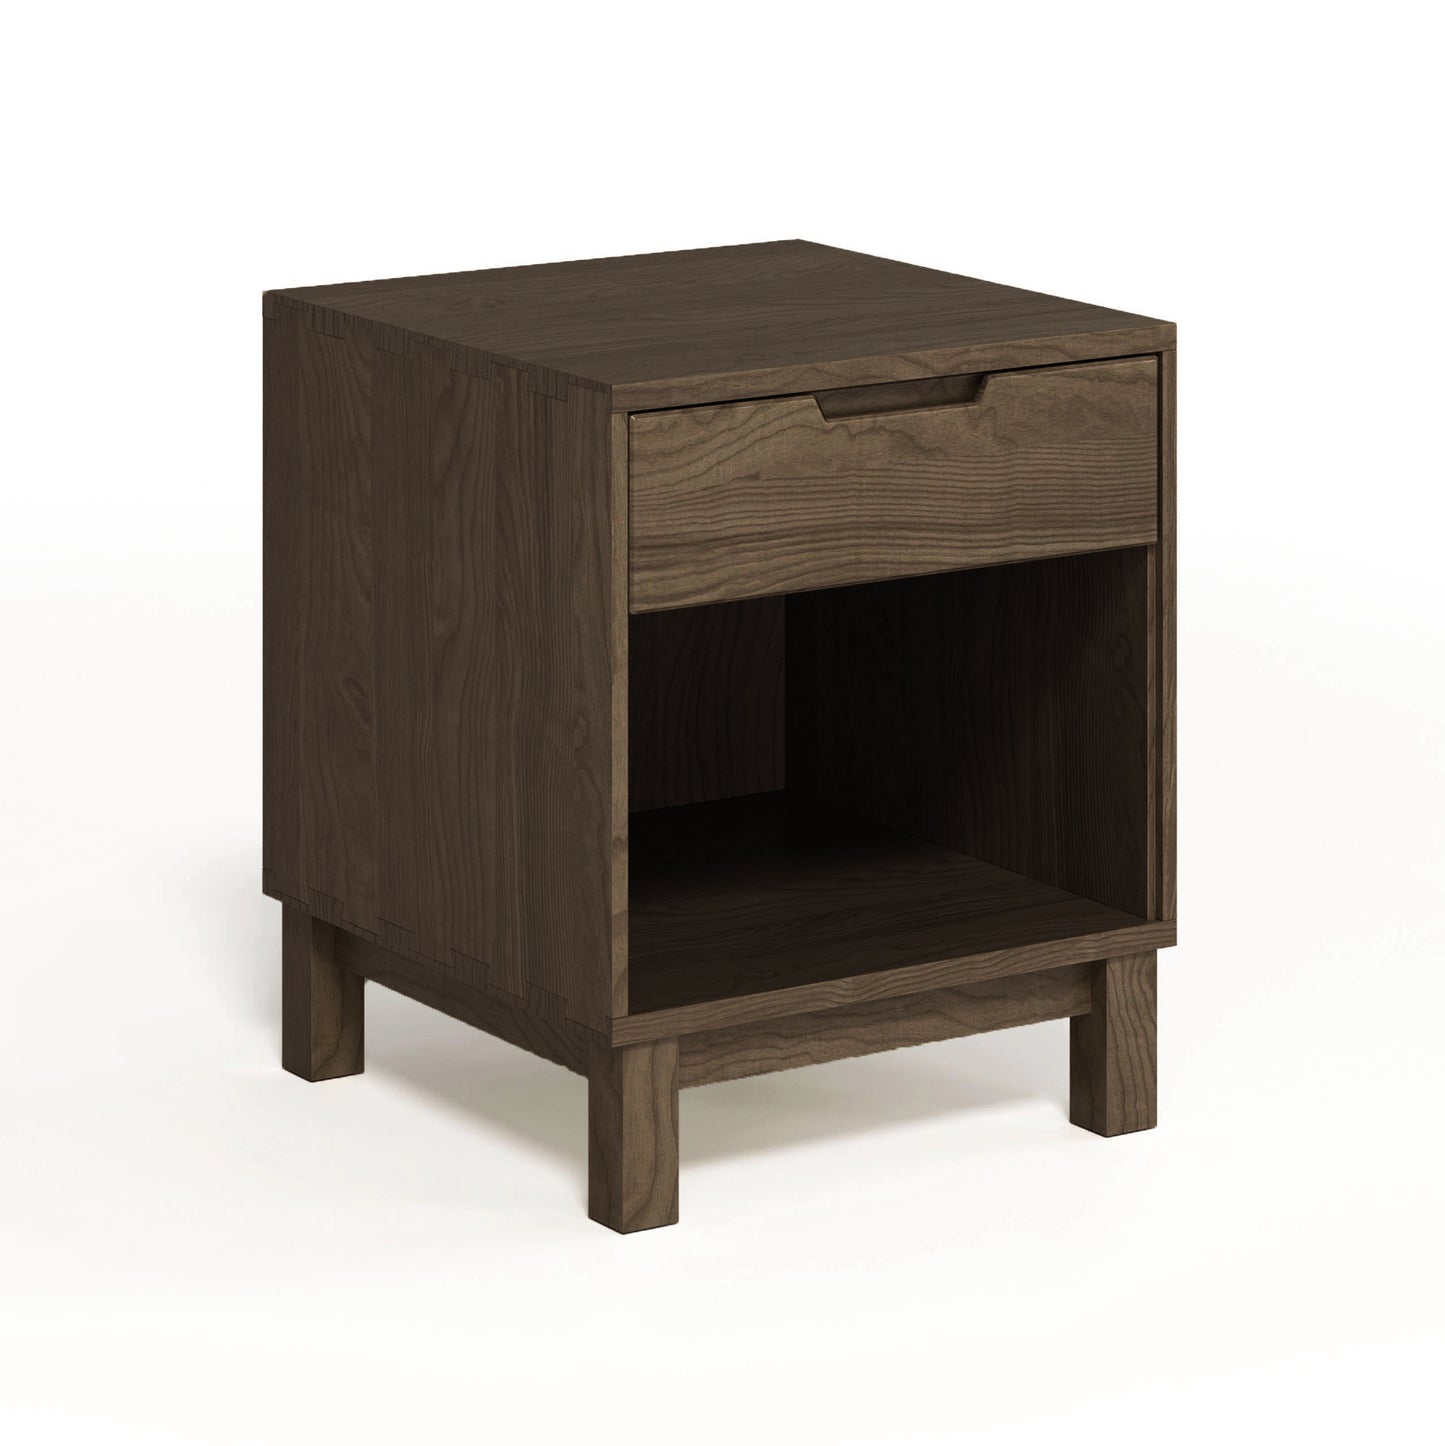 A dark brown solid oak hardwood nightstand, featuring an open shelf and a single drawer, set against a white background - the Copeland Furniture Oslo 1-Drawer Enclosed Shelf Nightstand.